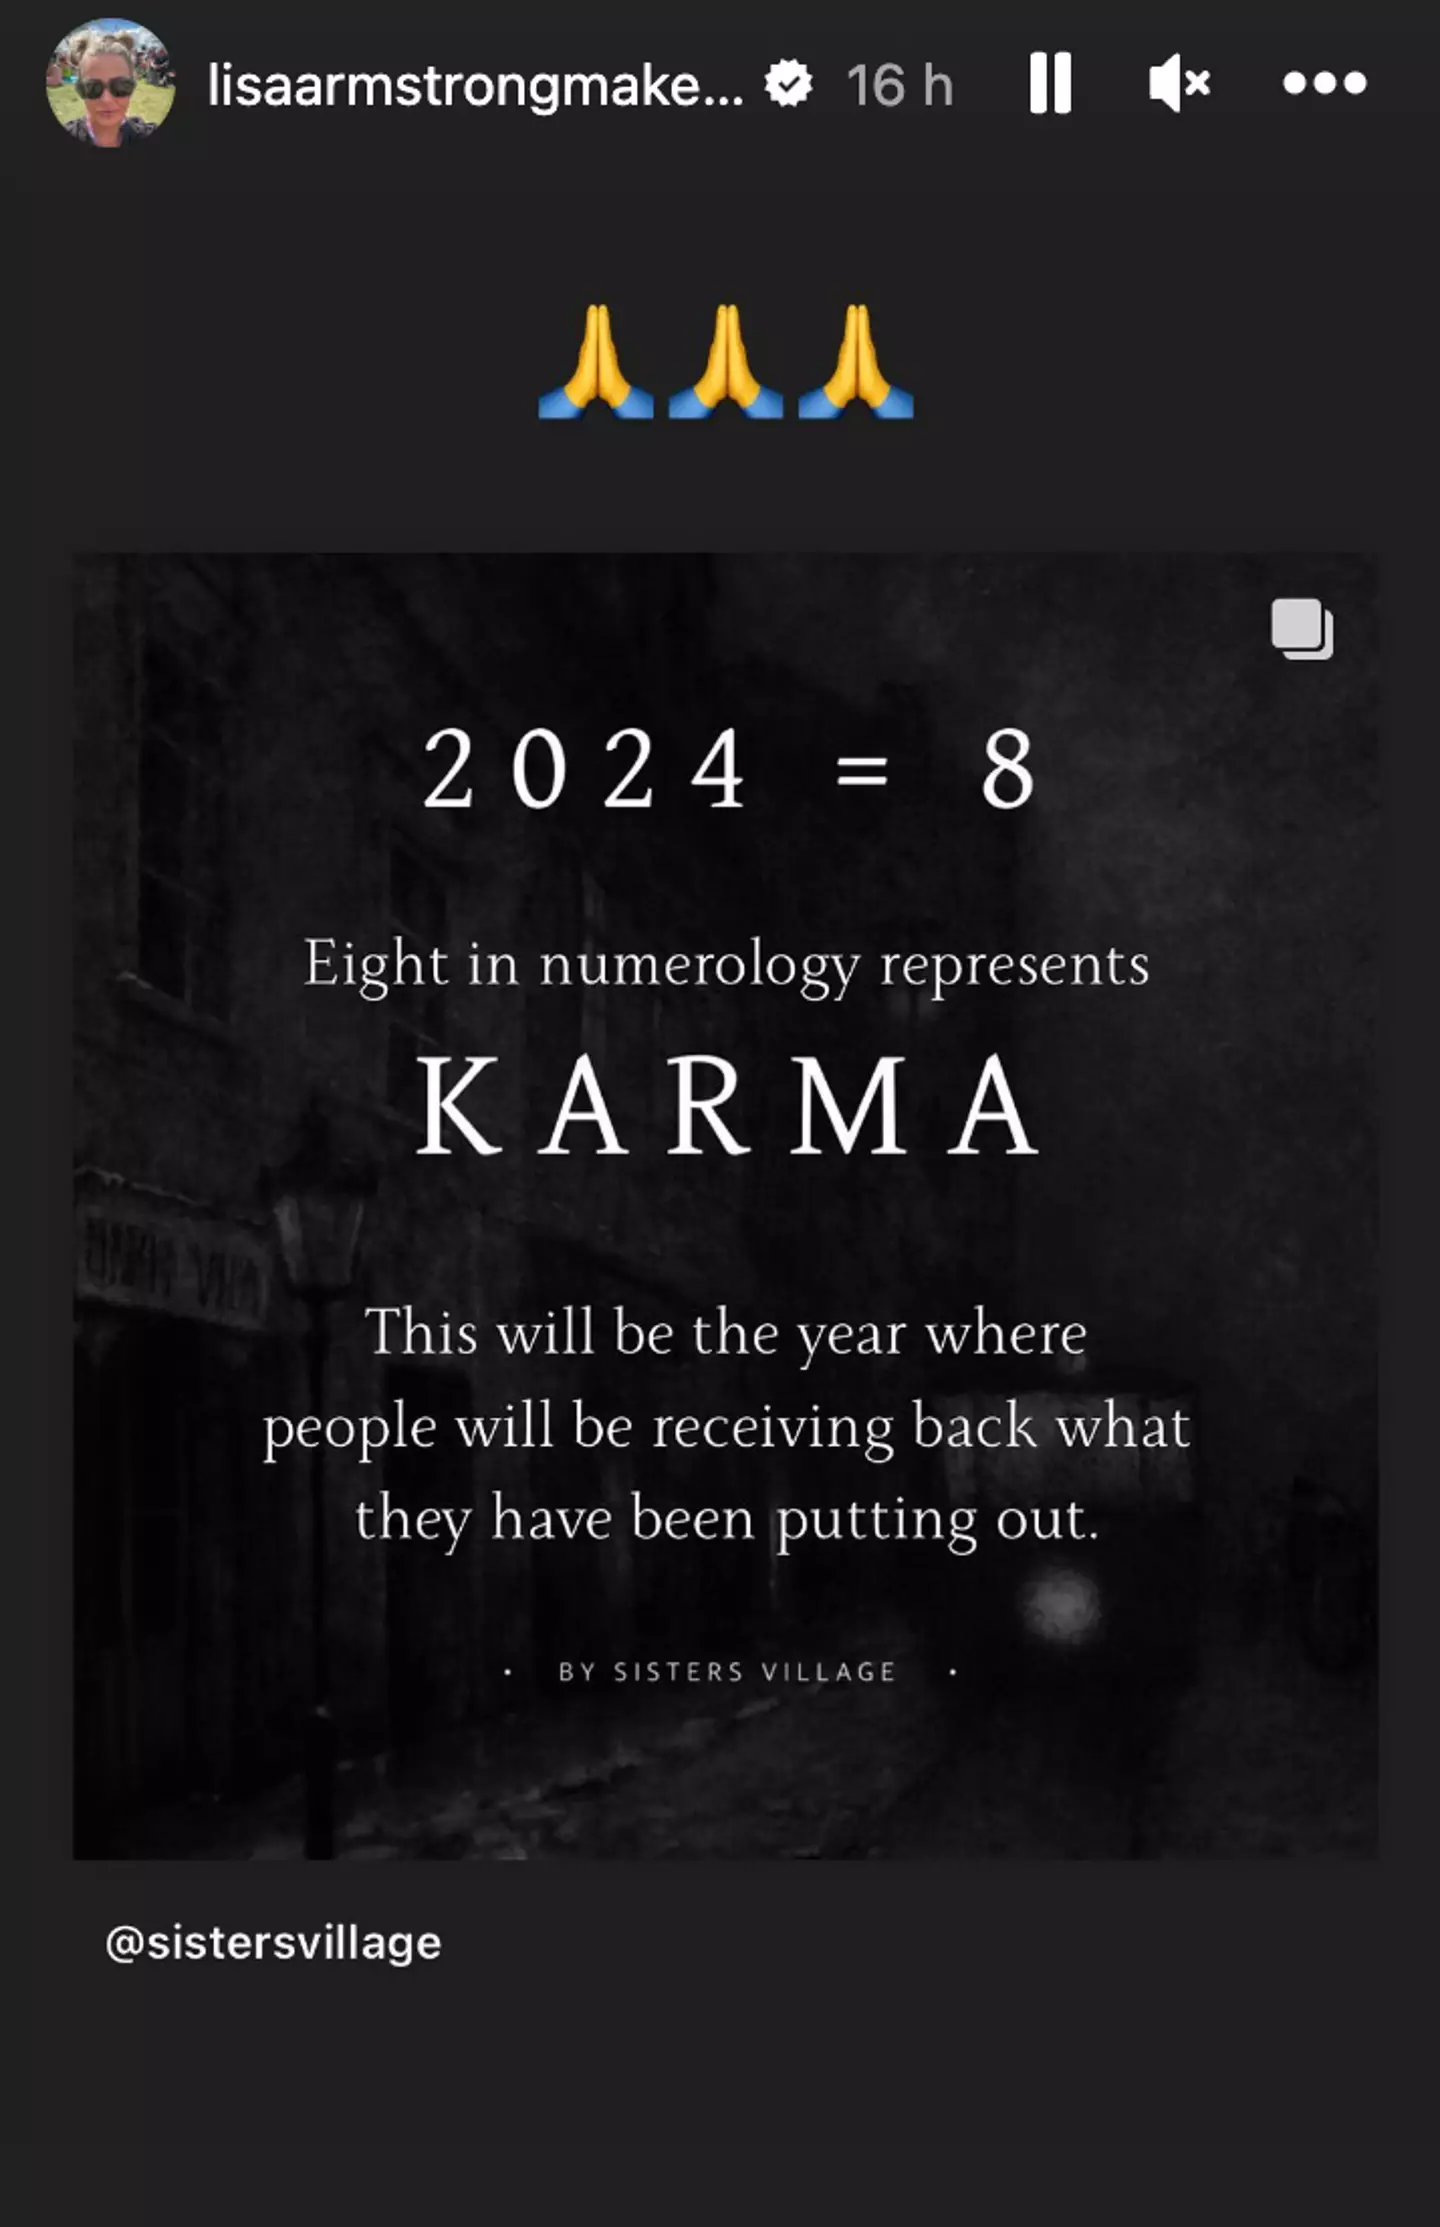 Armstrong posted a cryptic post about 'karma'.